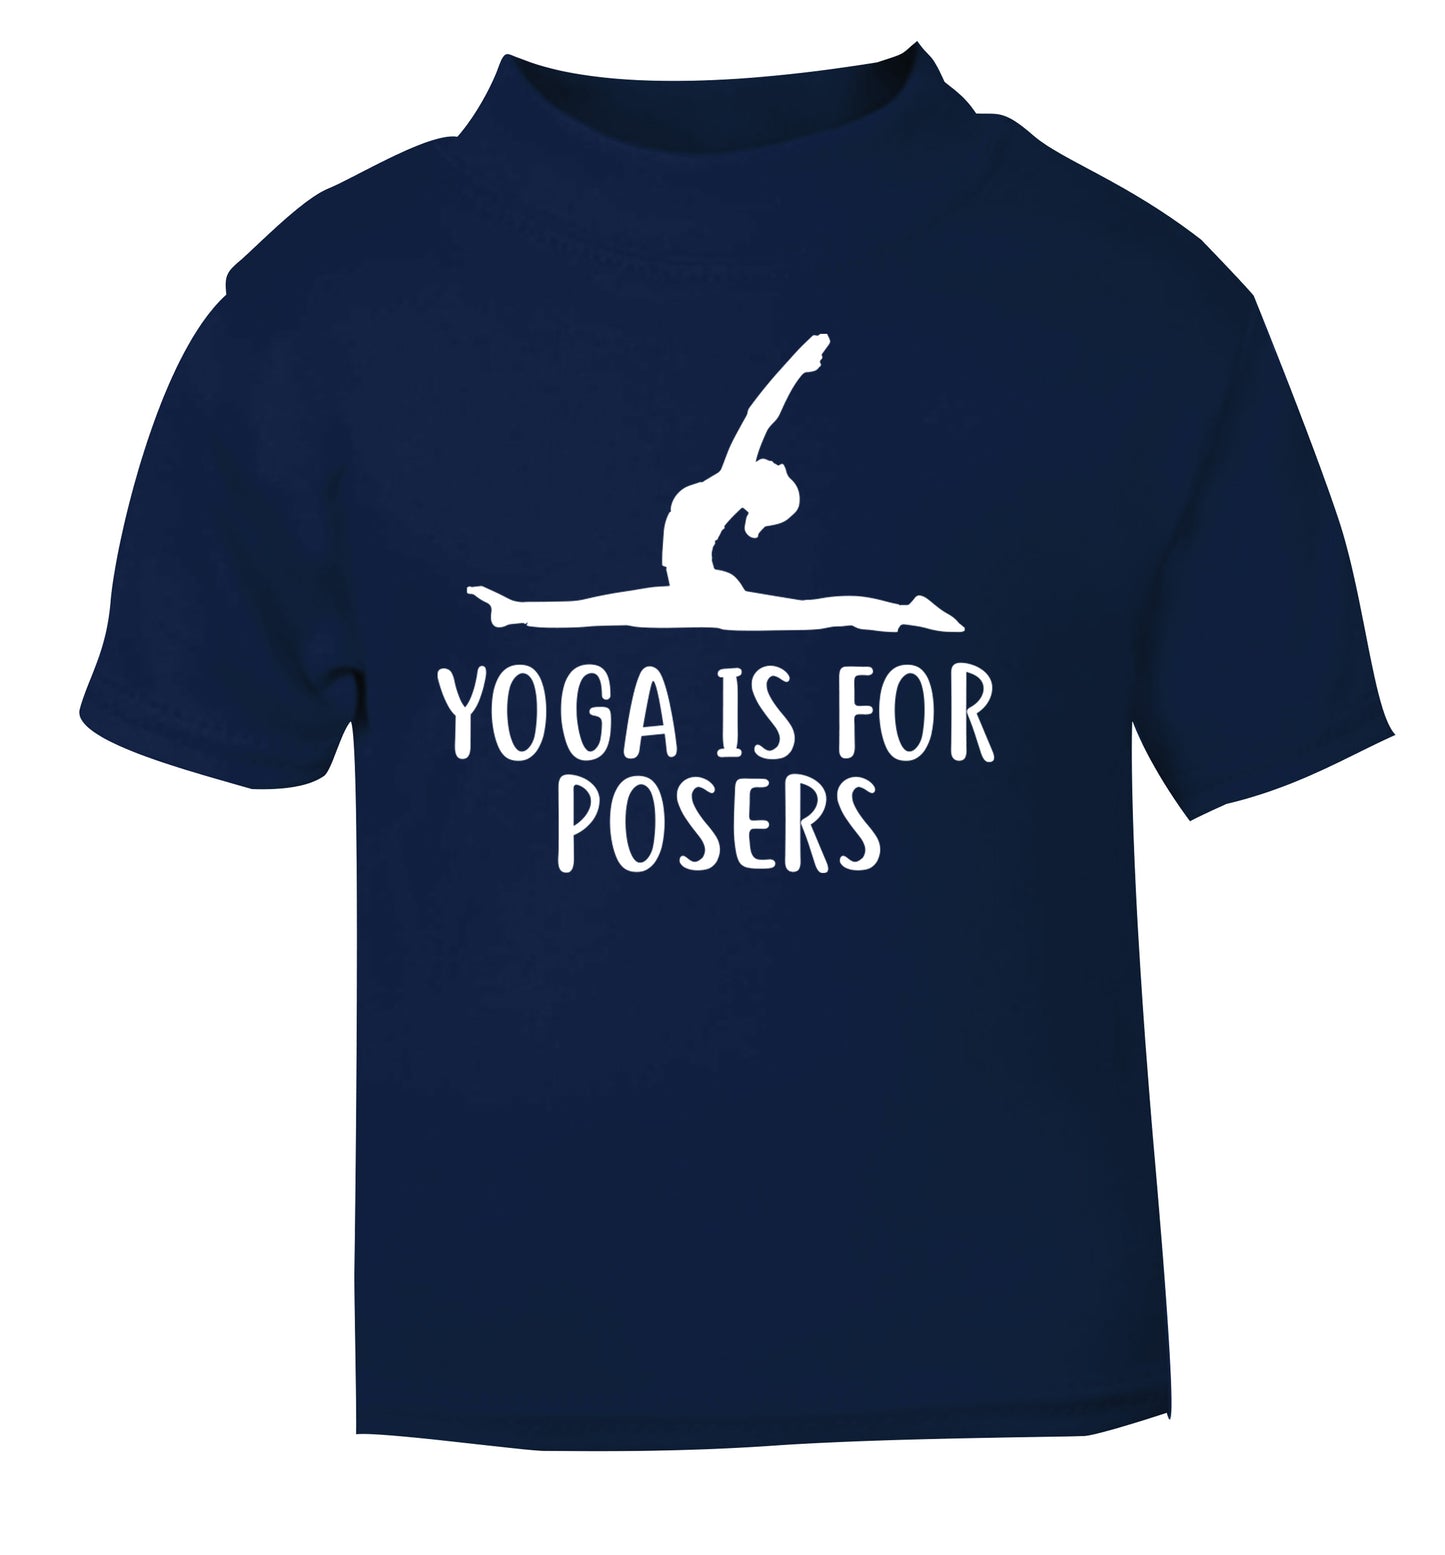 Yoga is for posers navy Baby Toddler Tshirt 2 Years